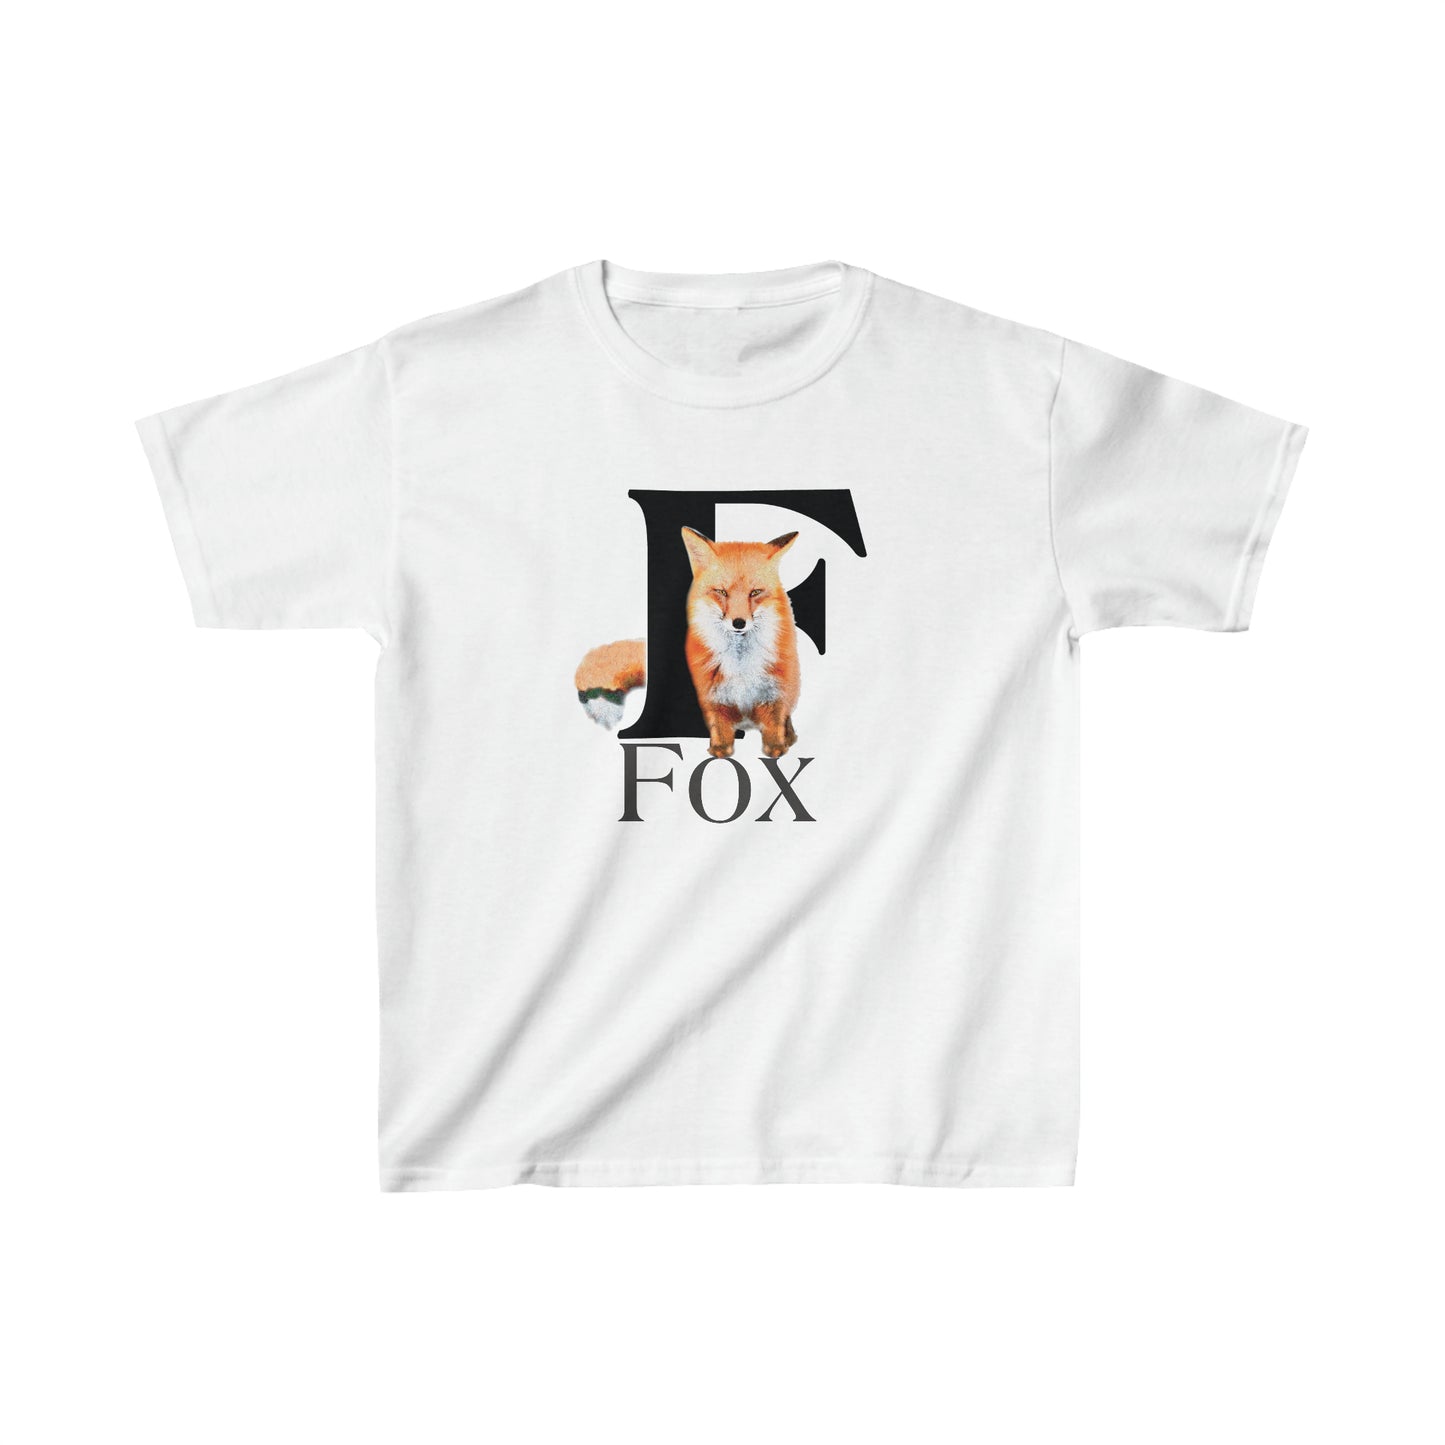 F is for Fox T-Shirt, Animal Letter F Tee, cute Fuzzy Fox Tee, Fox Drawing T-Shirt, animal t-shirt, animal alphabet T, animal letters Tee